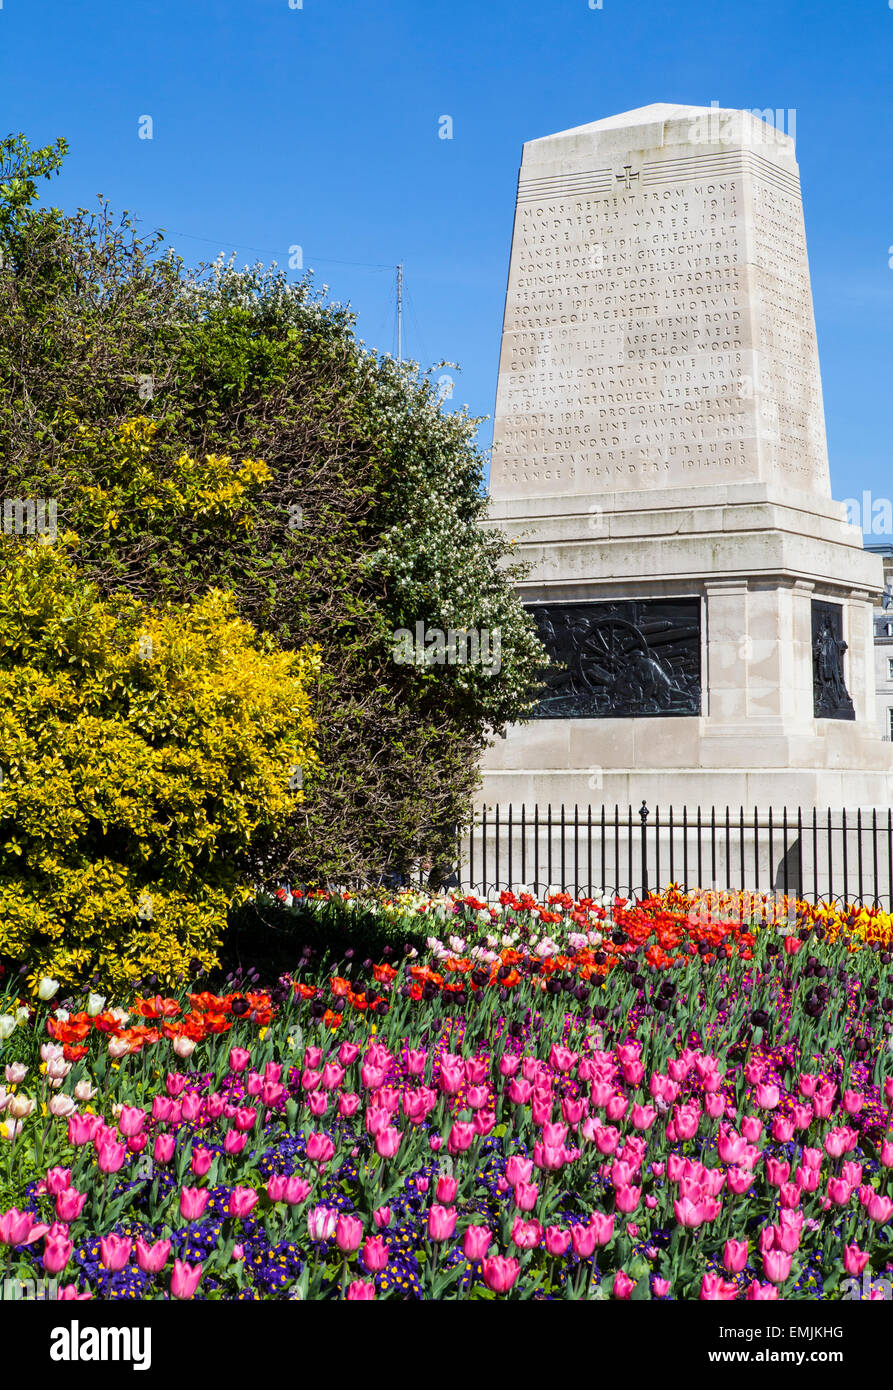 A beautiful view of the Guards Memorial from St. James’s Park in London. Stock Photo